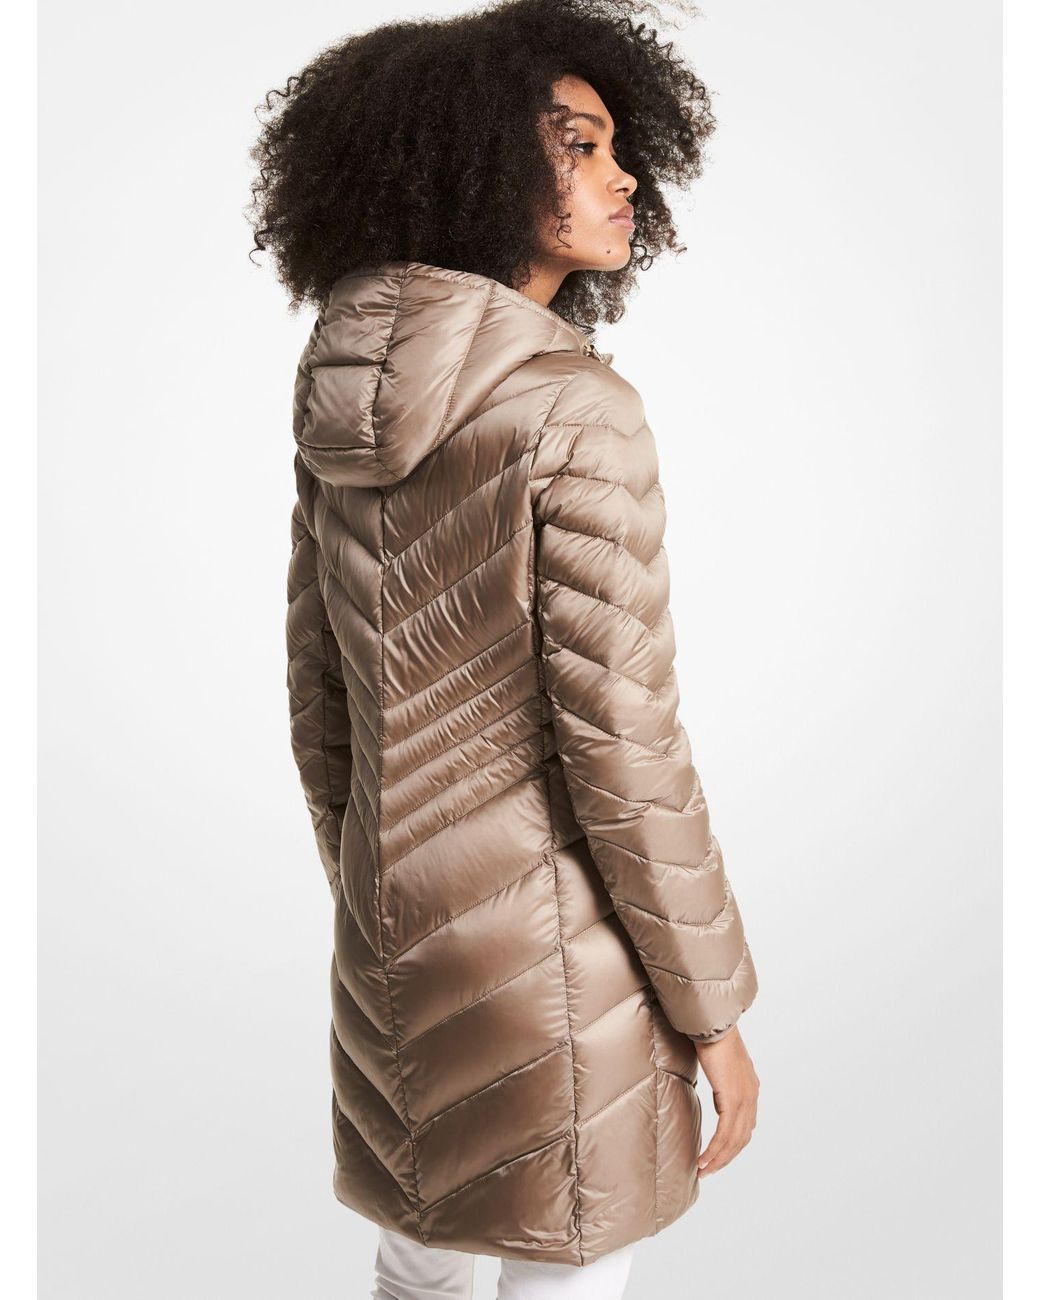 Michael Kors Quilted Nylon Packable Puffer Coat in Brown | Lyst